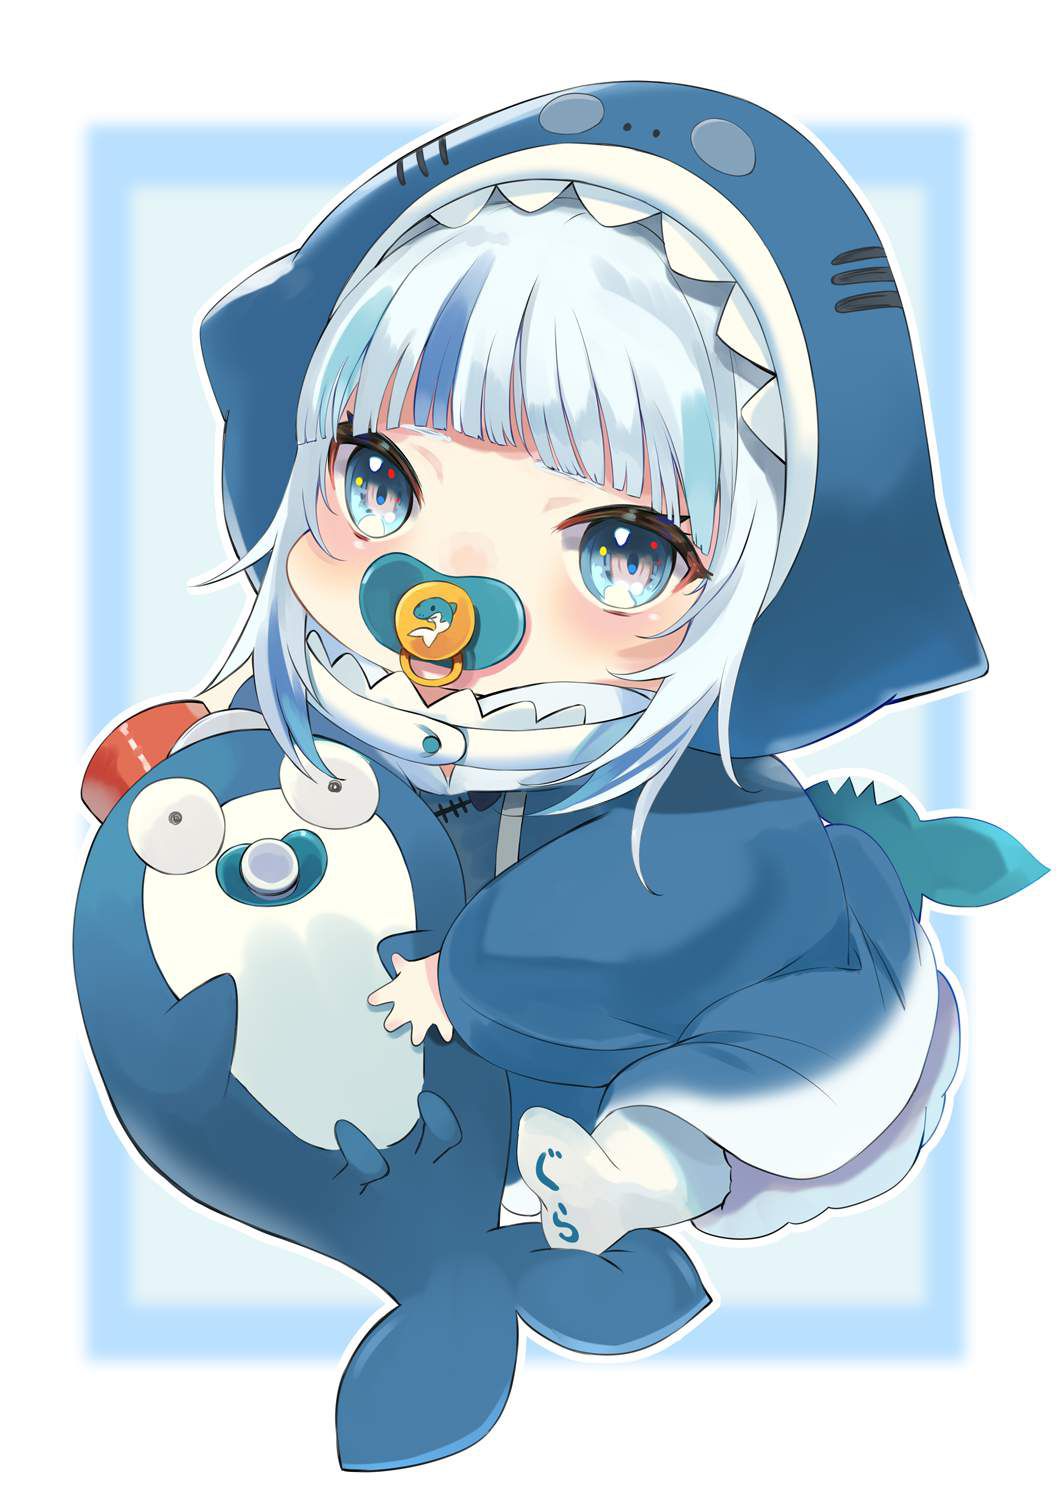 【Ekechan】Secondary erotic image of a girl sucking on a pacifier 20